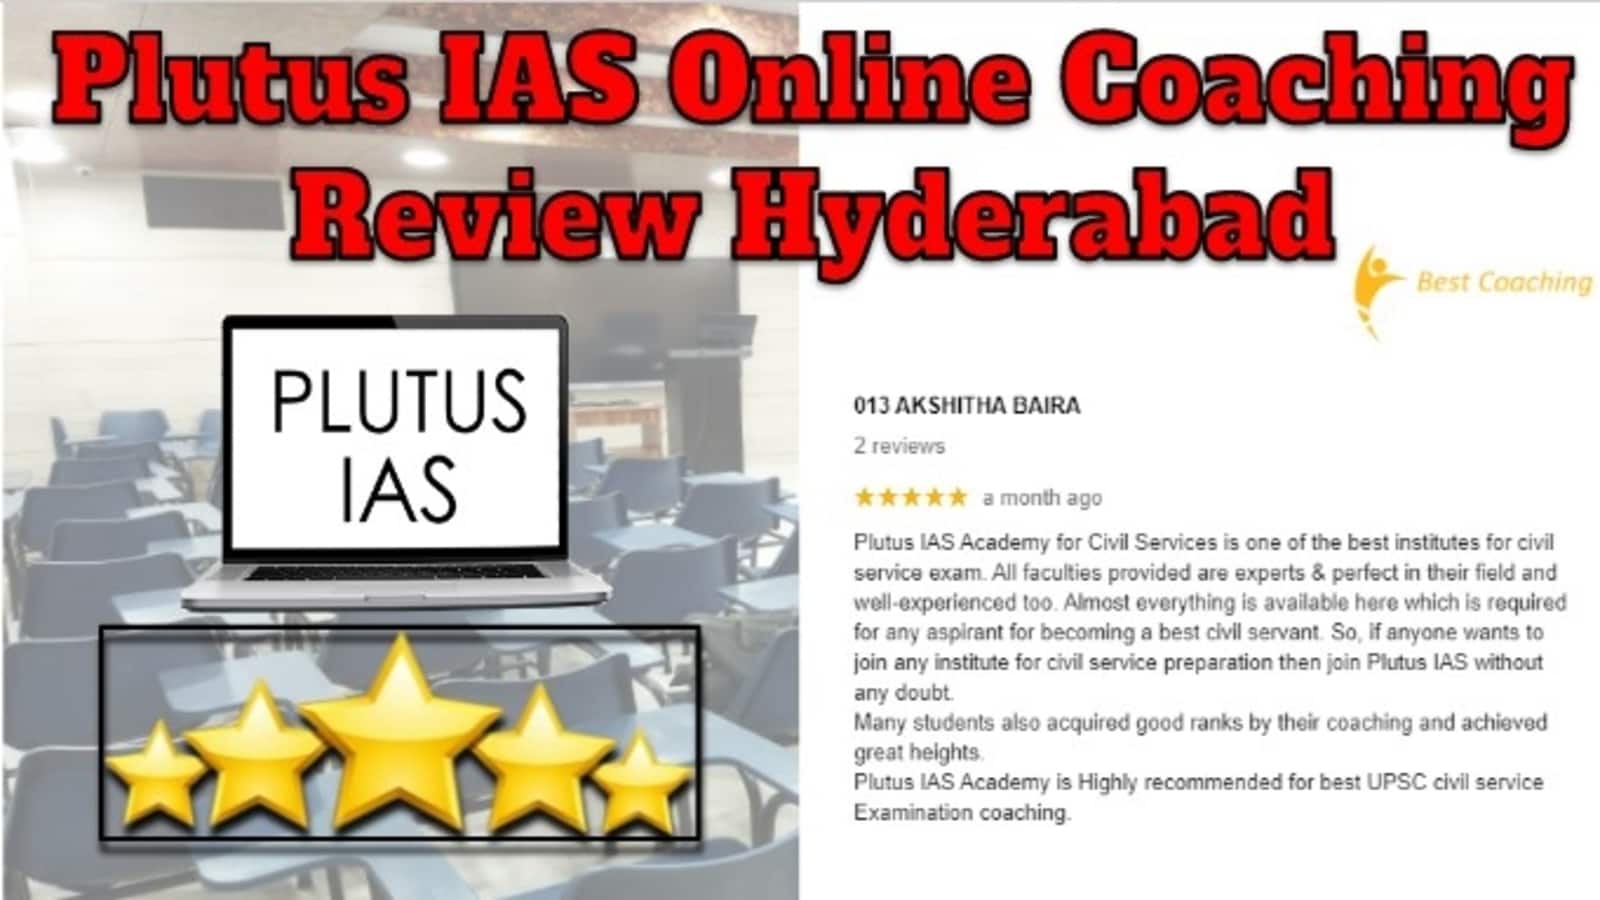 Plutus IAS Online Coaching Review Hyderabad